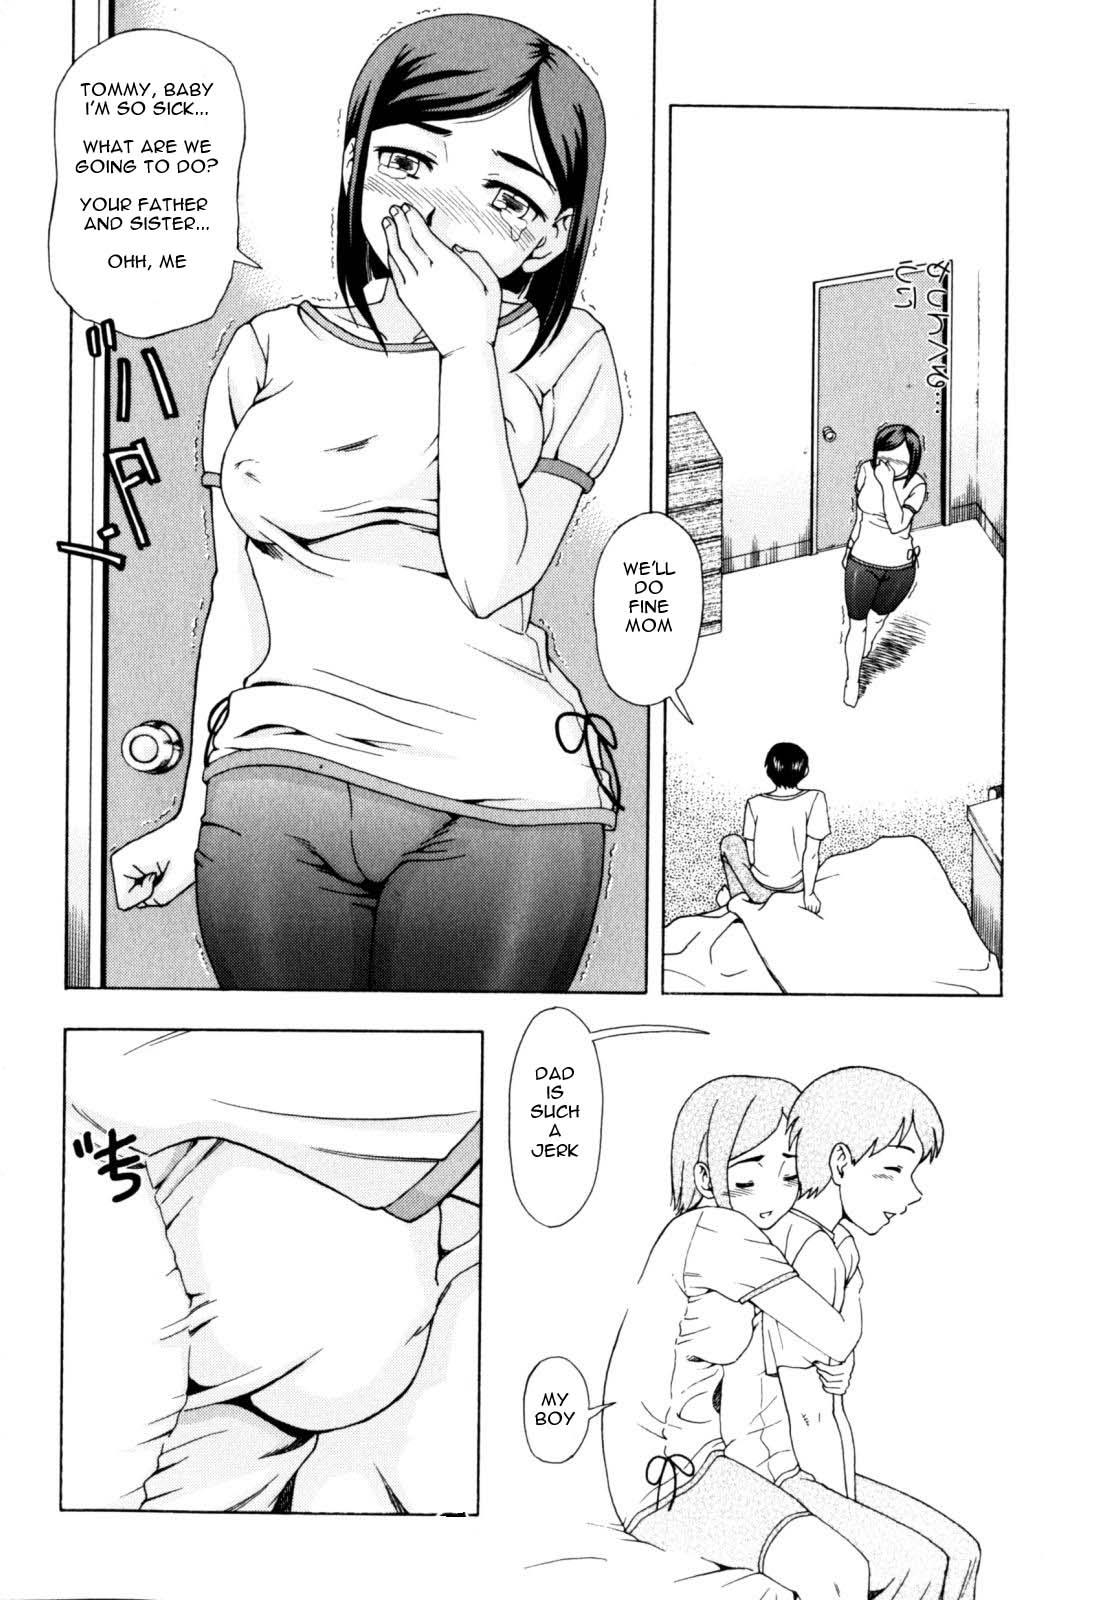 Tit for Tat for Tommy [English] [Rewrite] [olddog51] page 3 full